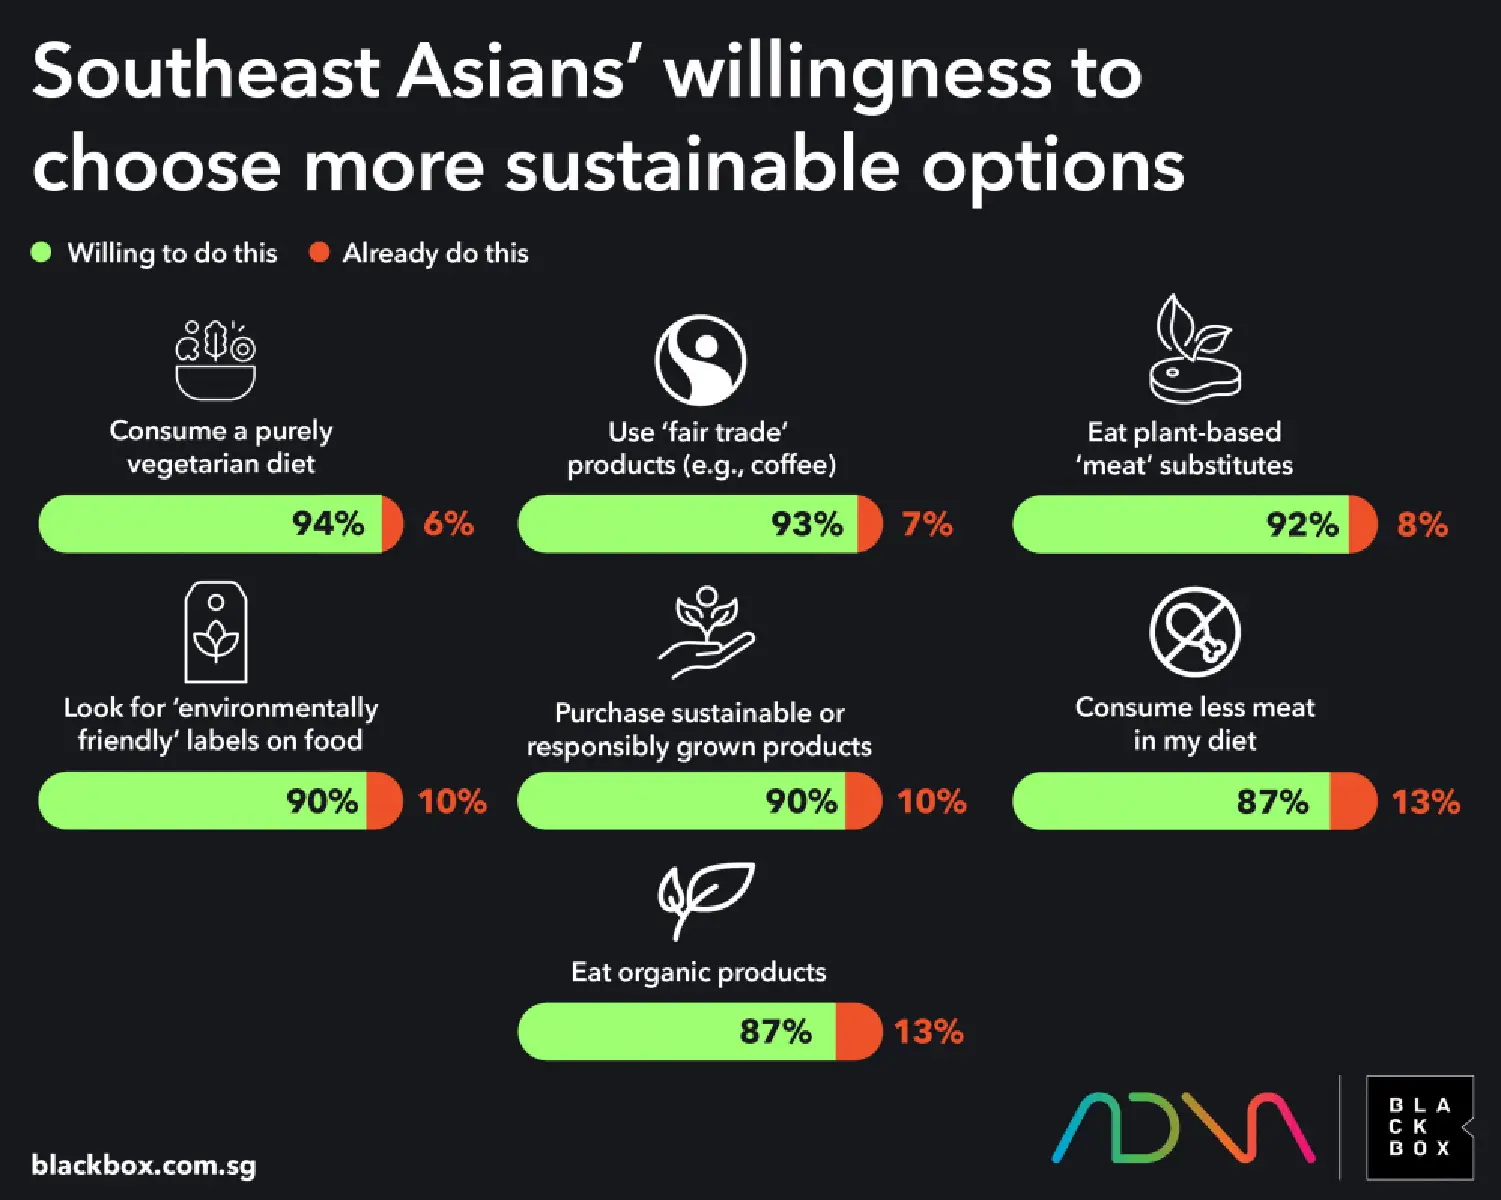 harts of southeast asians’ willingness to change food habits